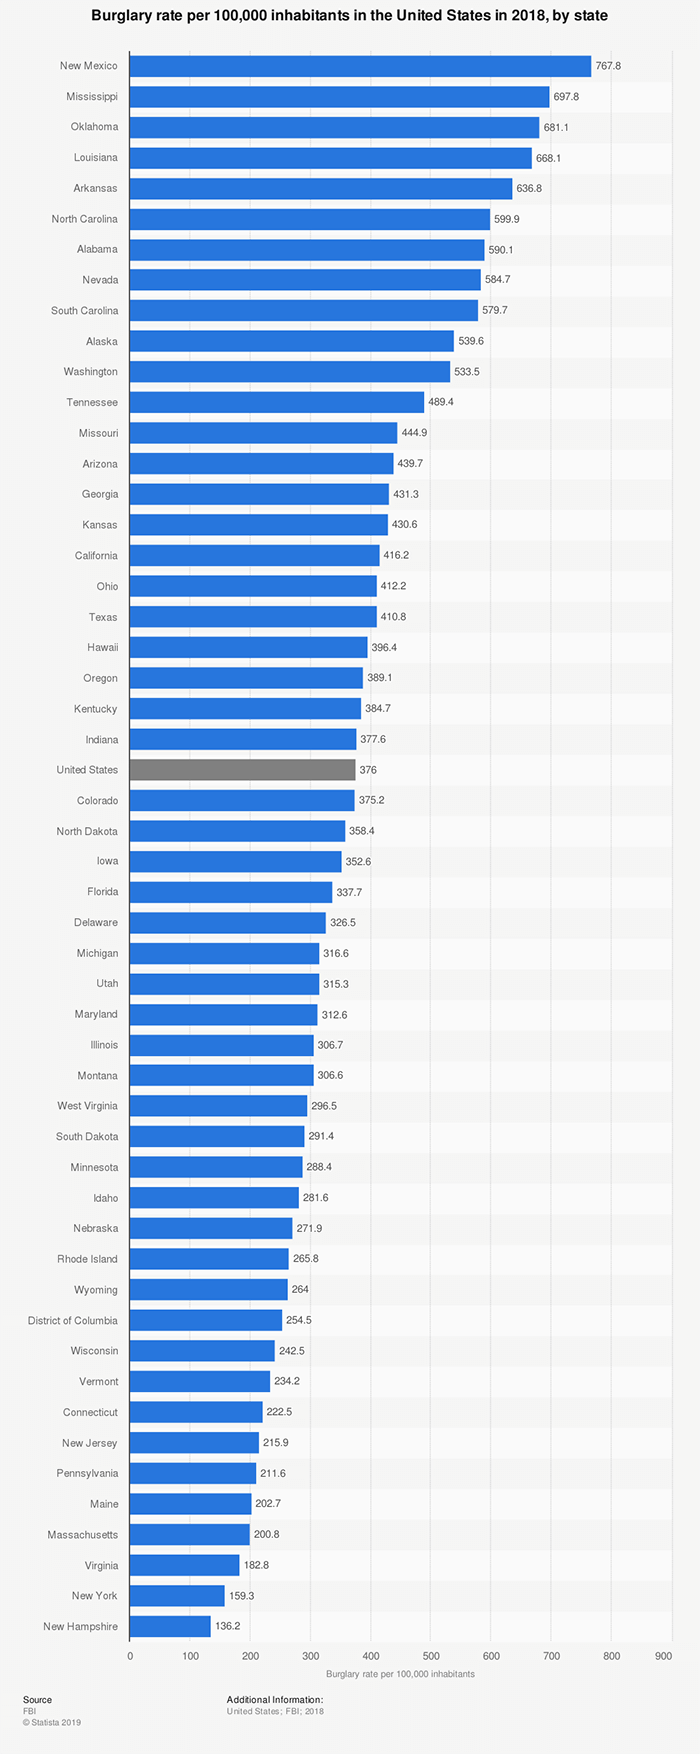 Burglary rate by state